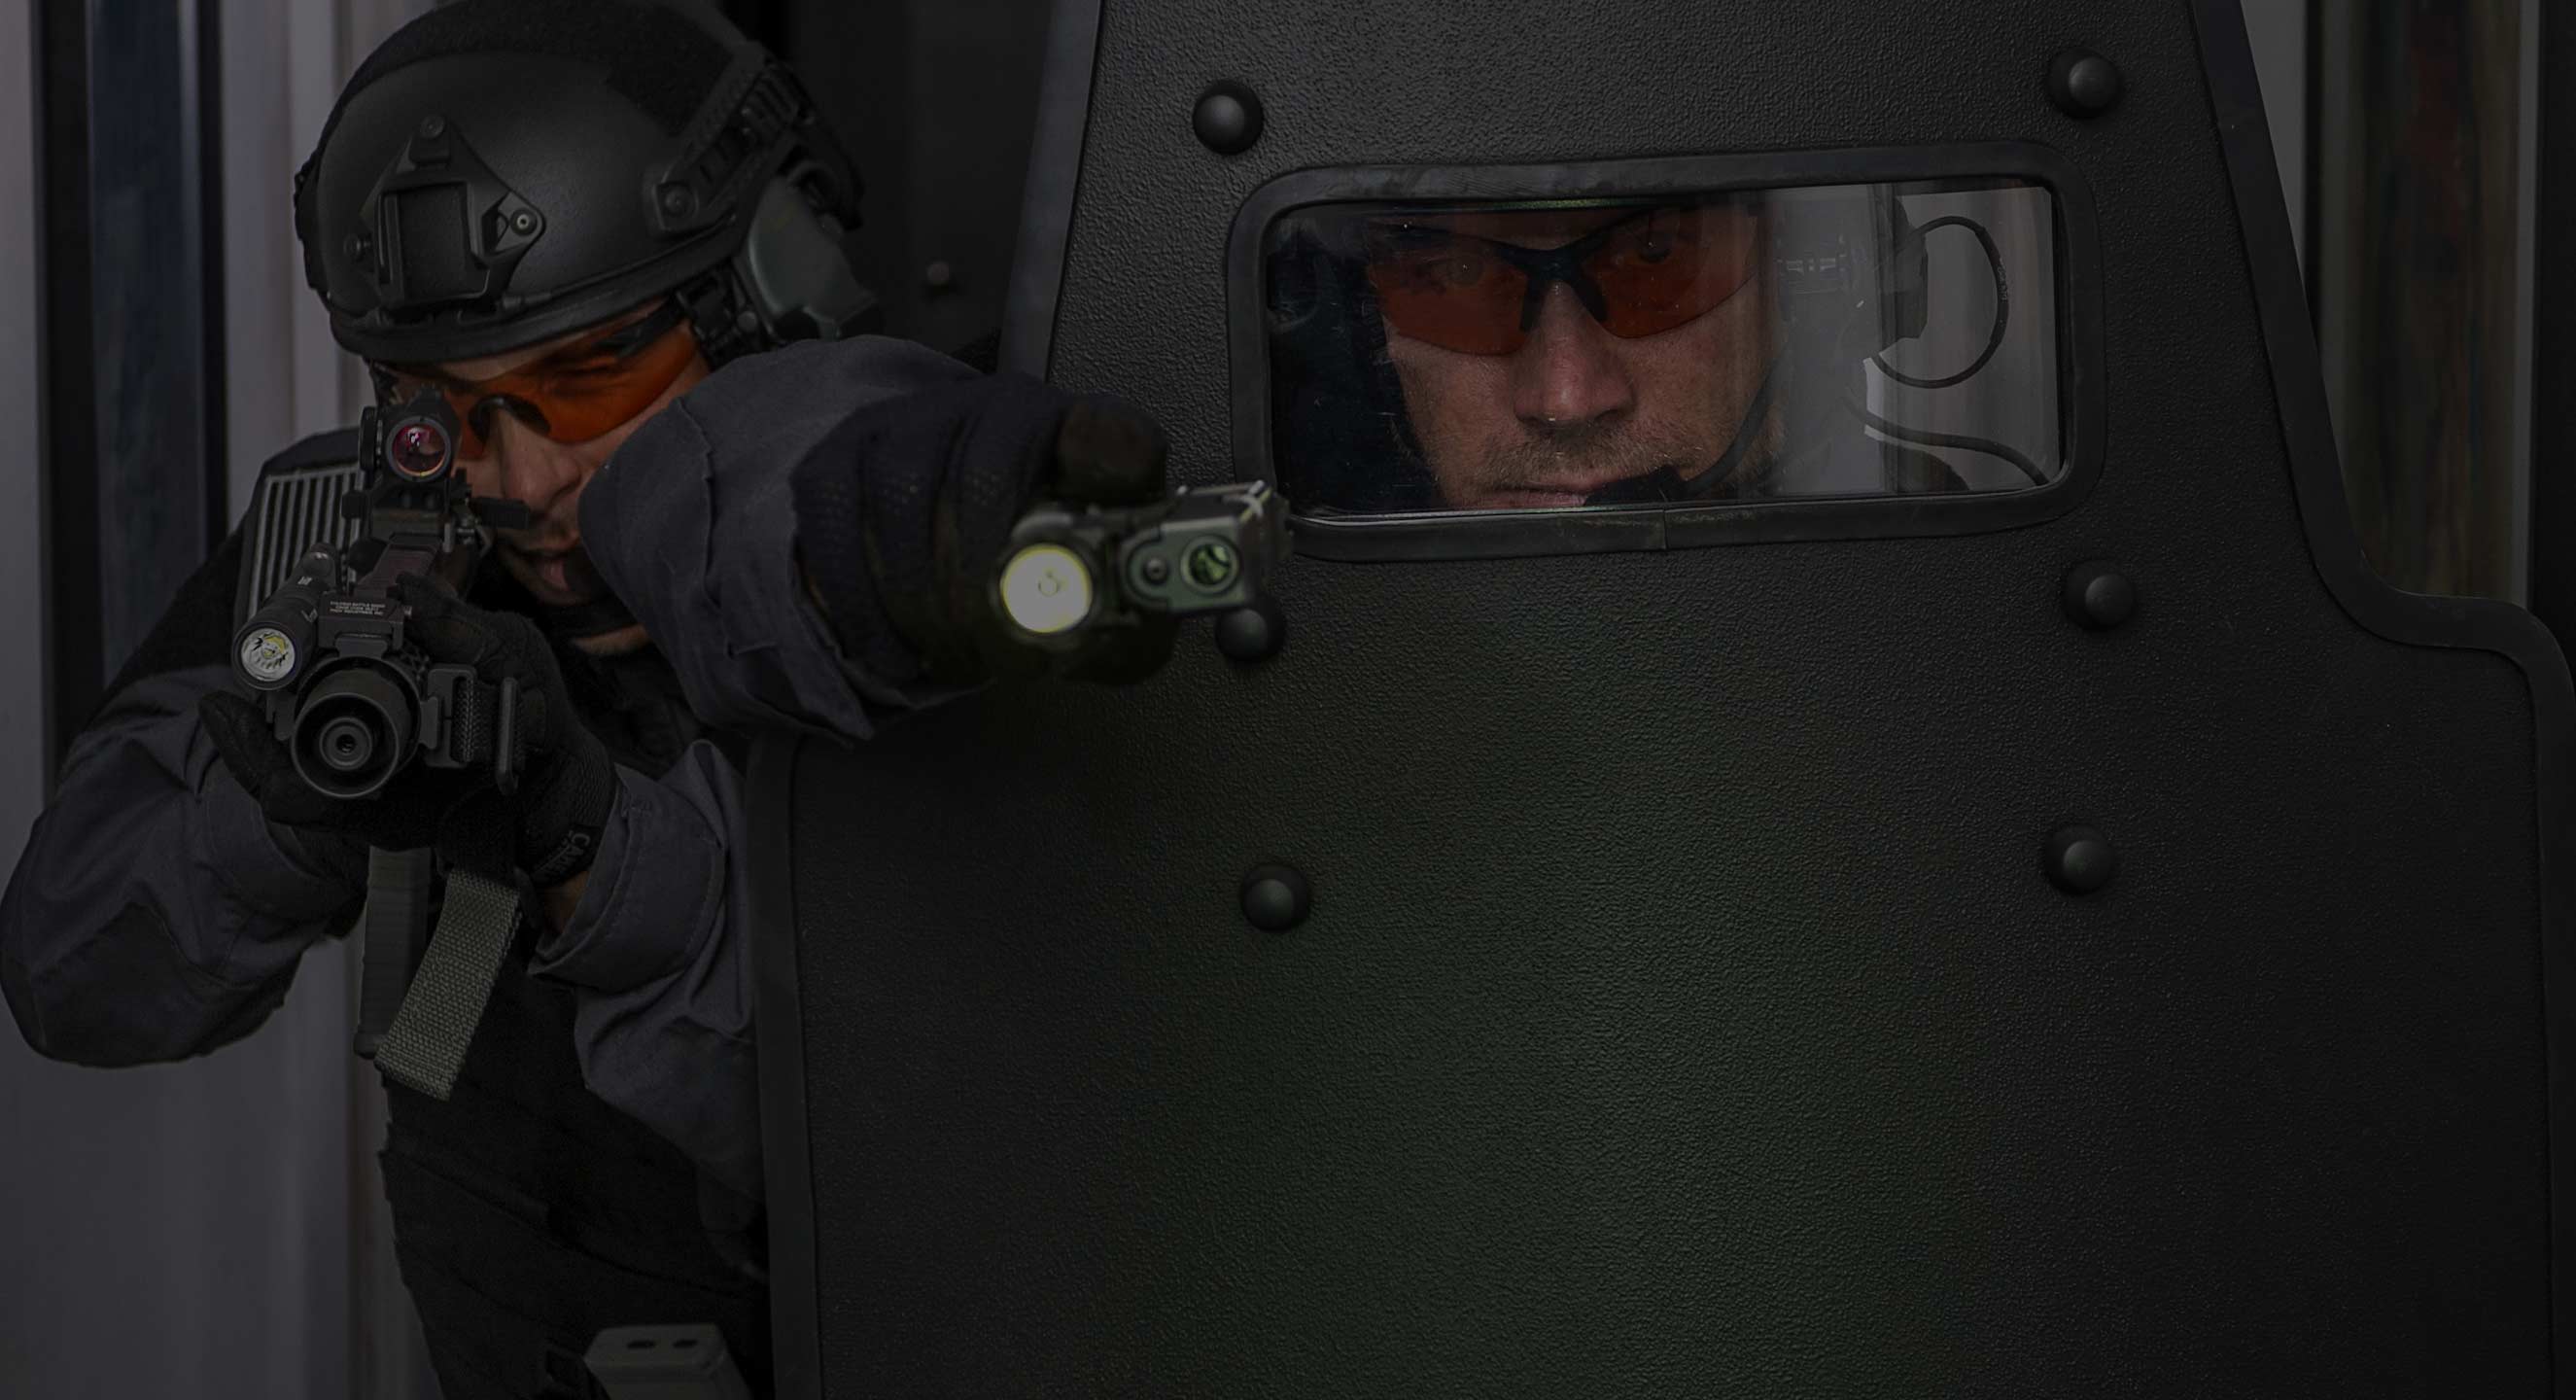 Protect the body with ballistic shield